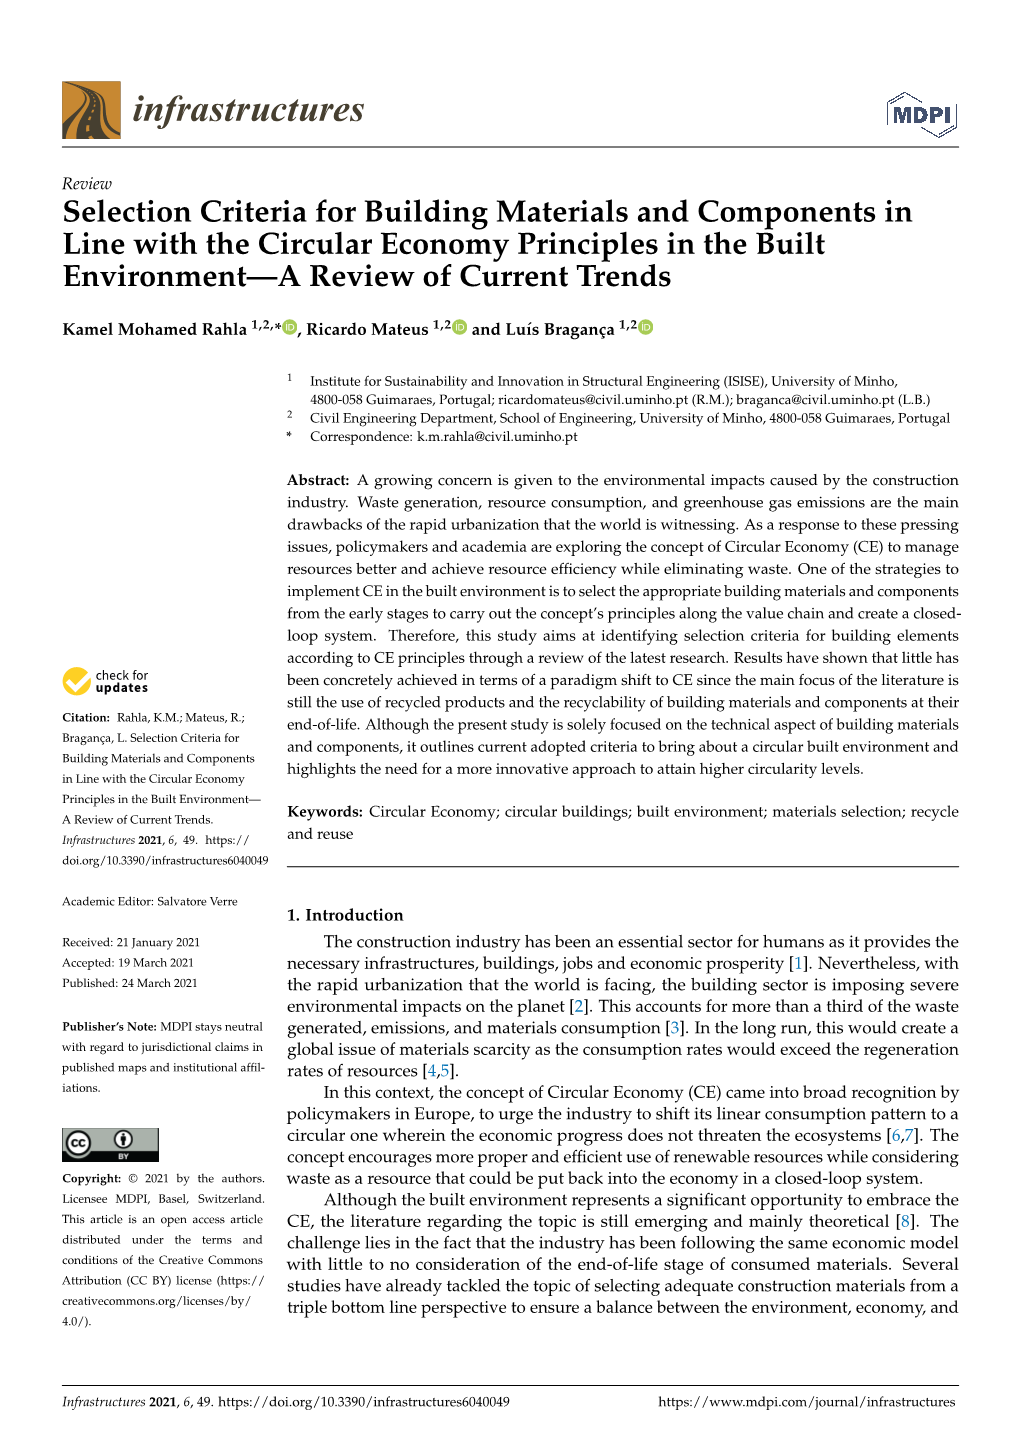 Selection Criteria for Building Materials and Components in Line with the Circular Economy Principles in the Built Environment—A Review of Current Trends